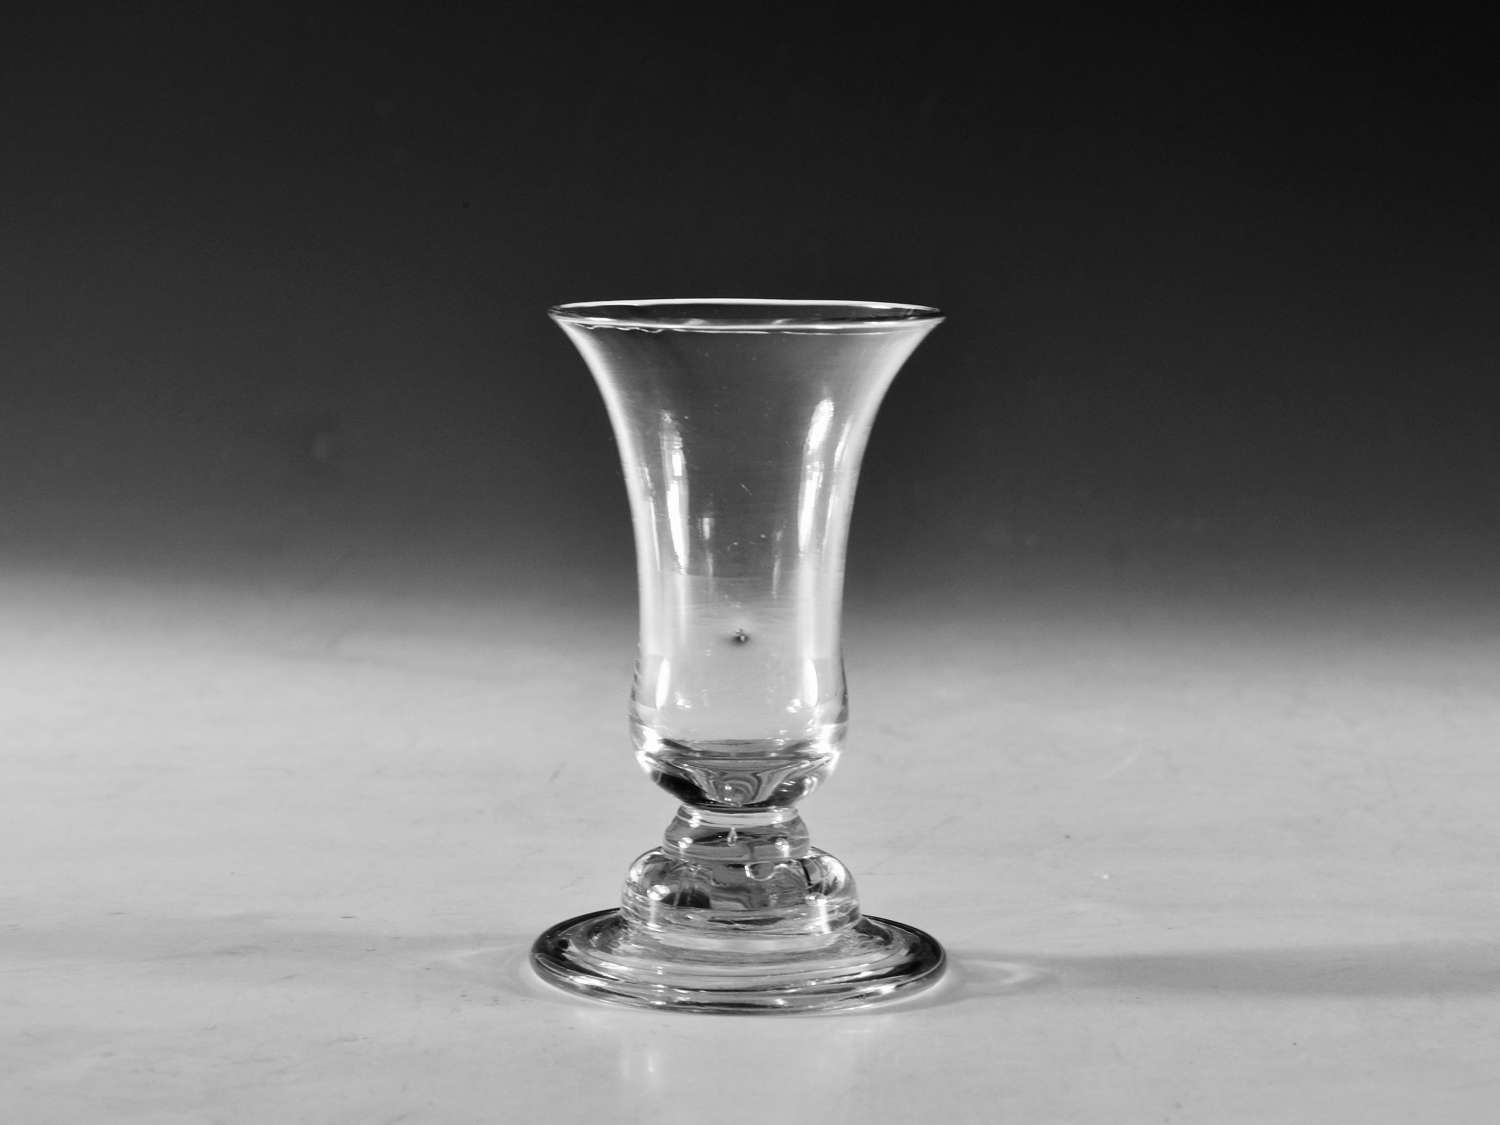 Antique glass jelly glass English c1750